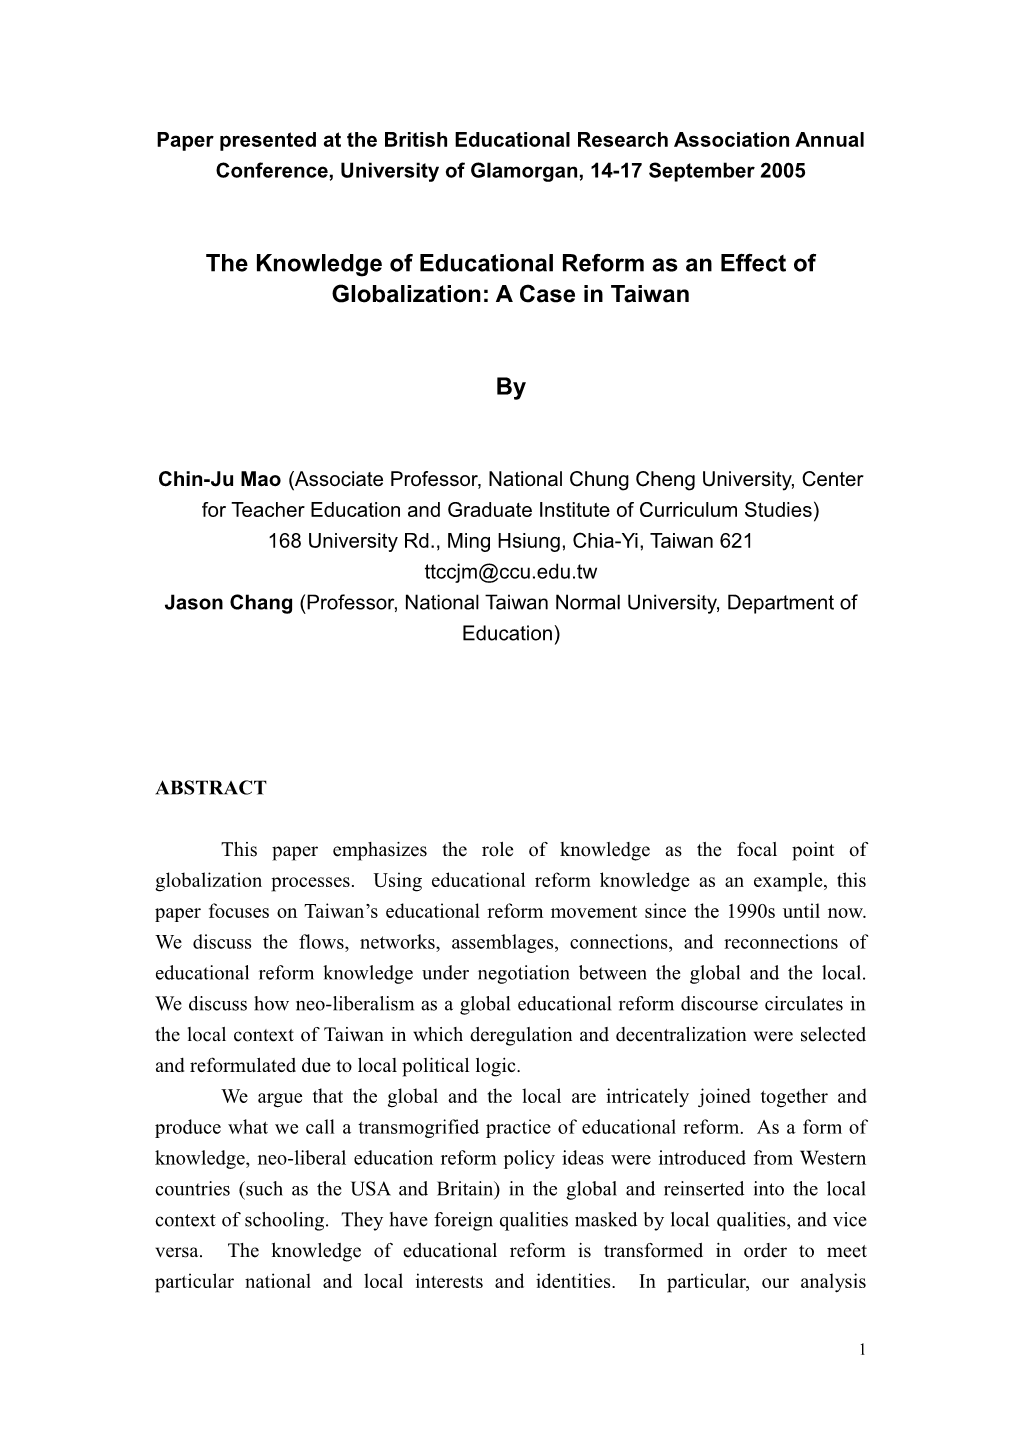 The Knowledge of Educational Reform As Effect of Globalization: a Case in Taiwan